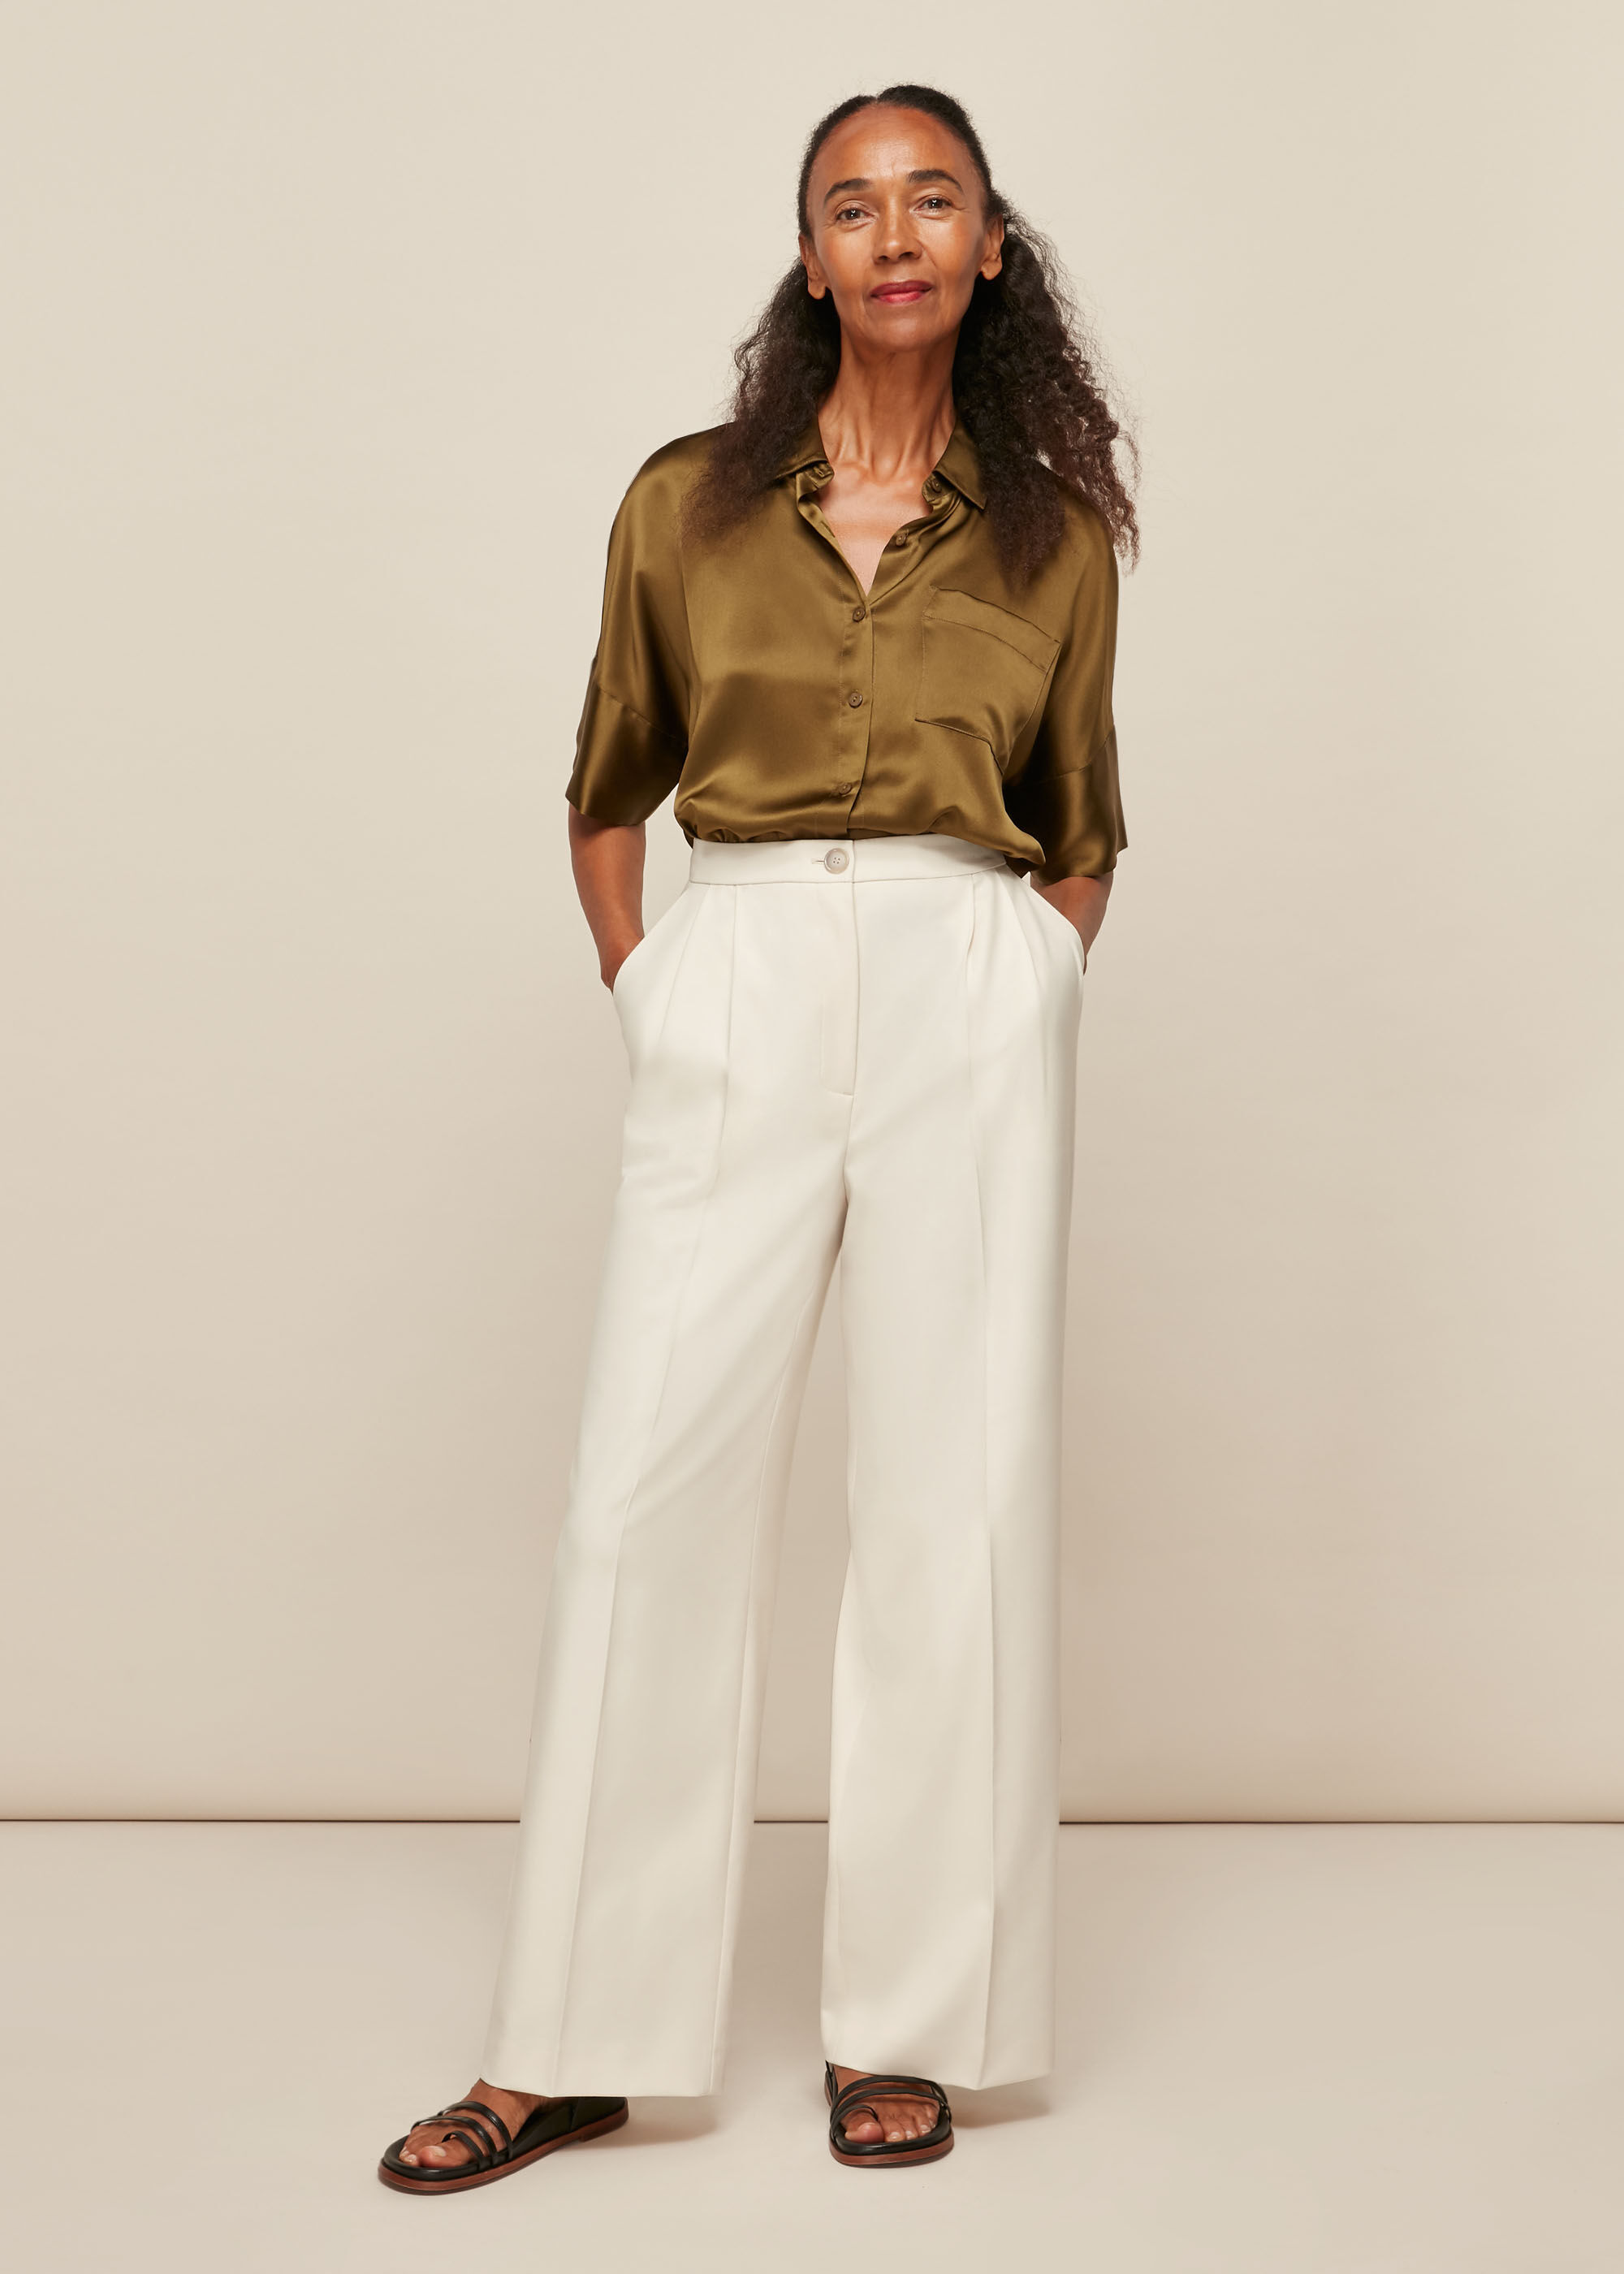 What to wear with wide leg pants Styles you need to know  Woman  Home